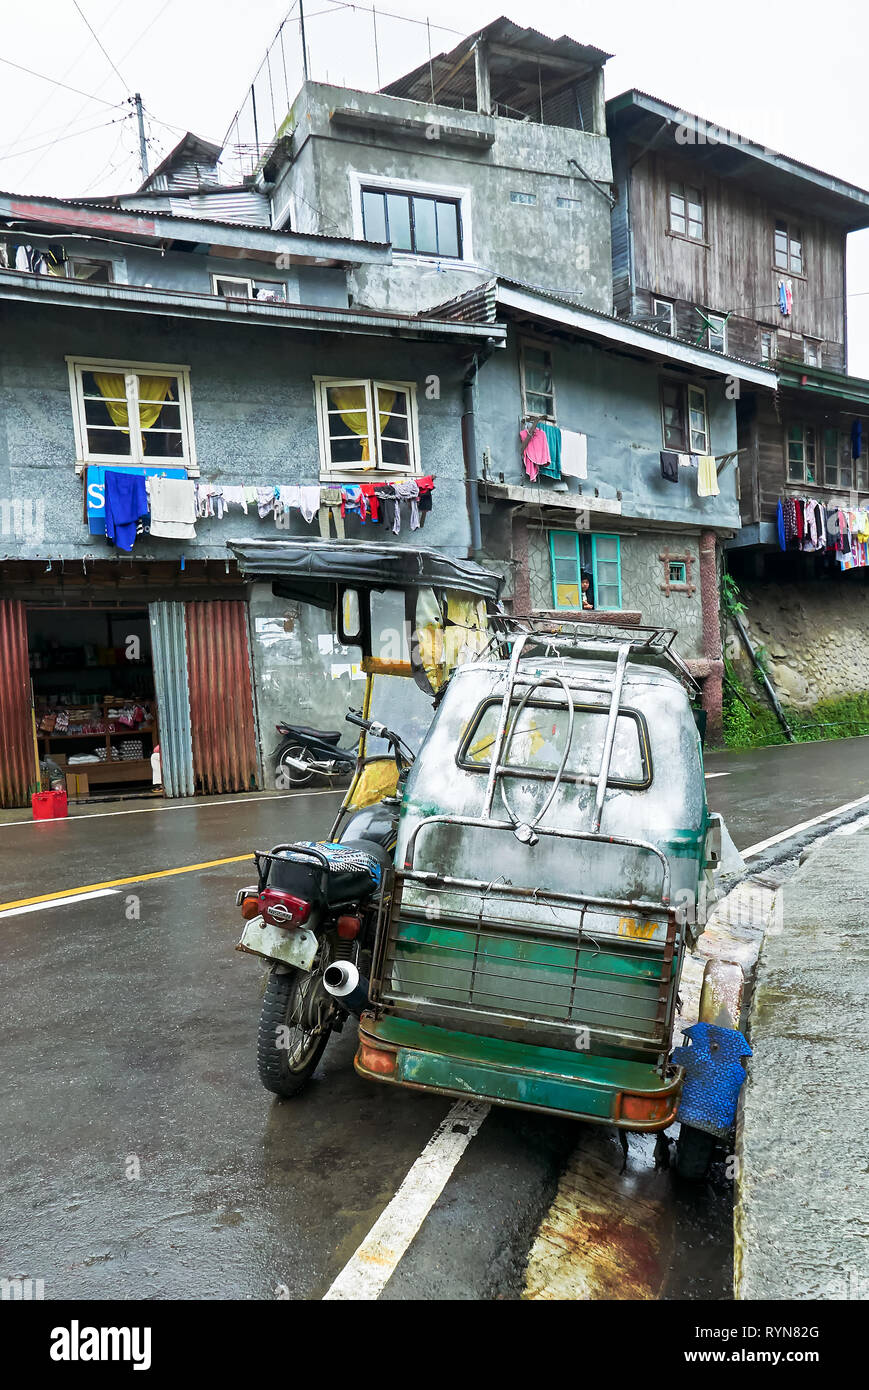 A Motorcycle with sidecar parking along a curved road in Banaue Town, Ifugao Province, Philippines, with typical simple buildings in the background. Stock Photo